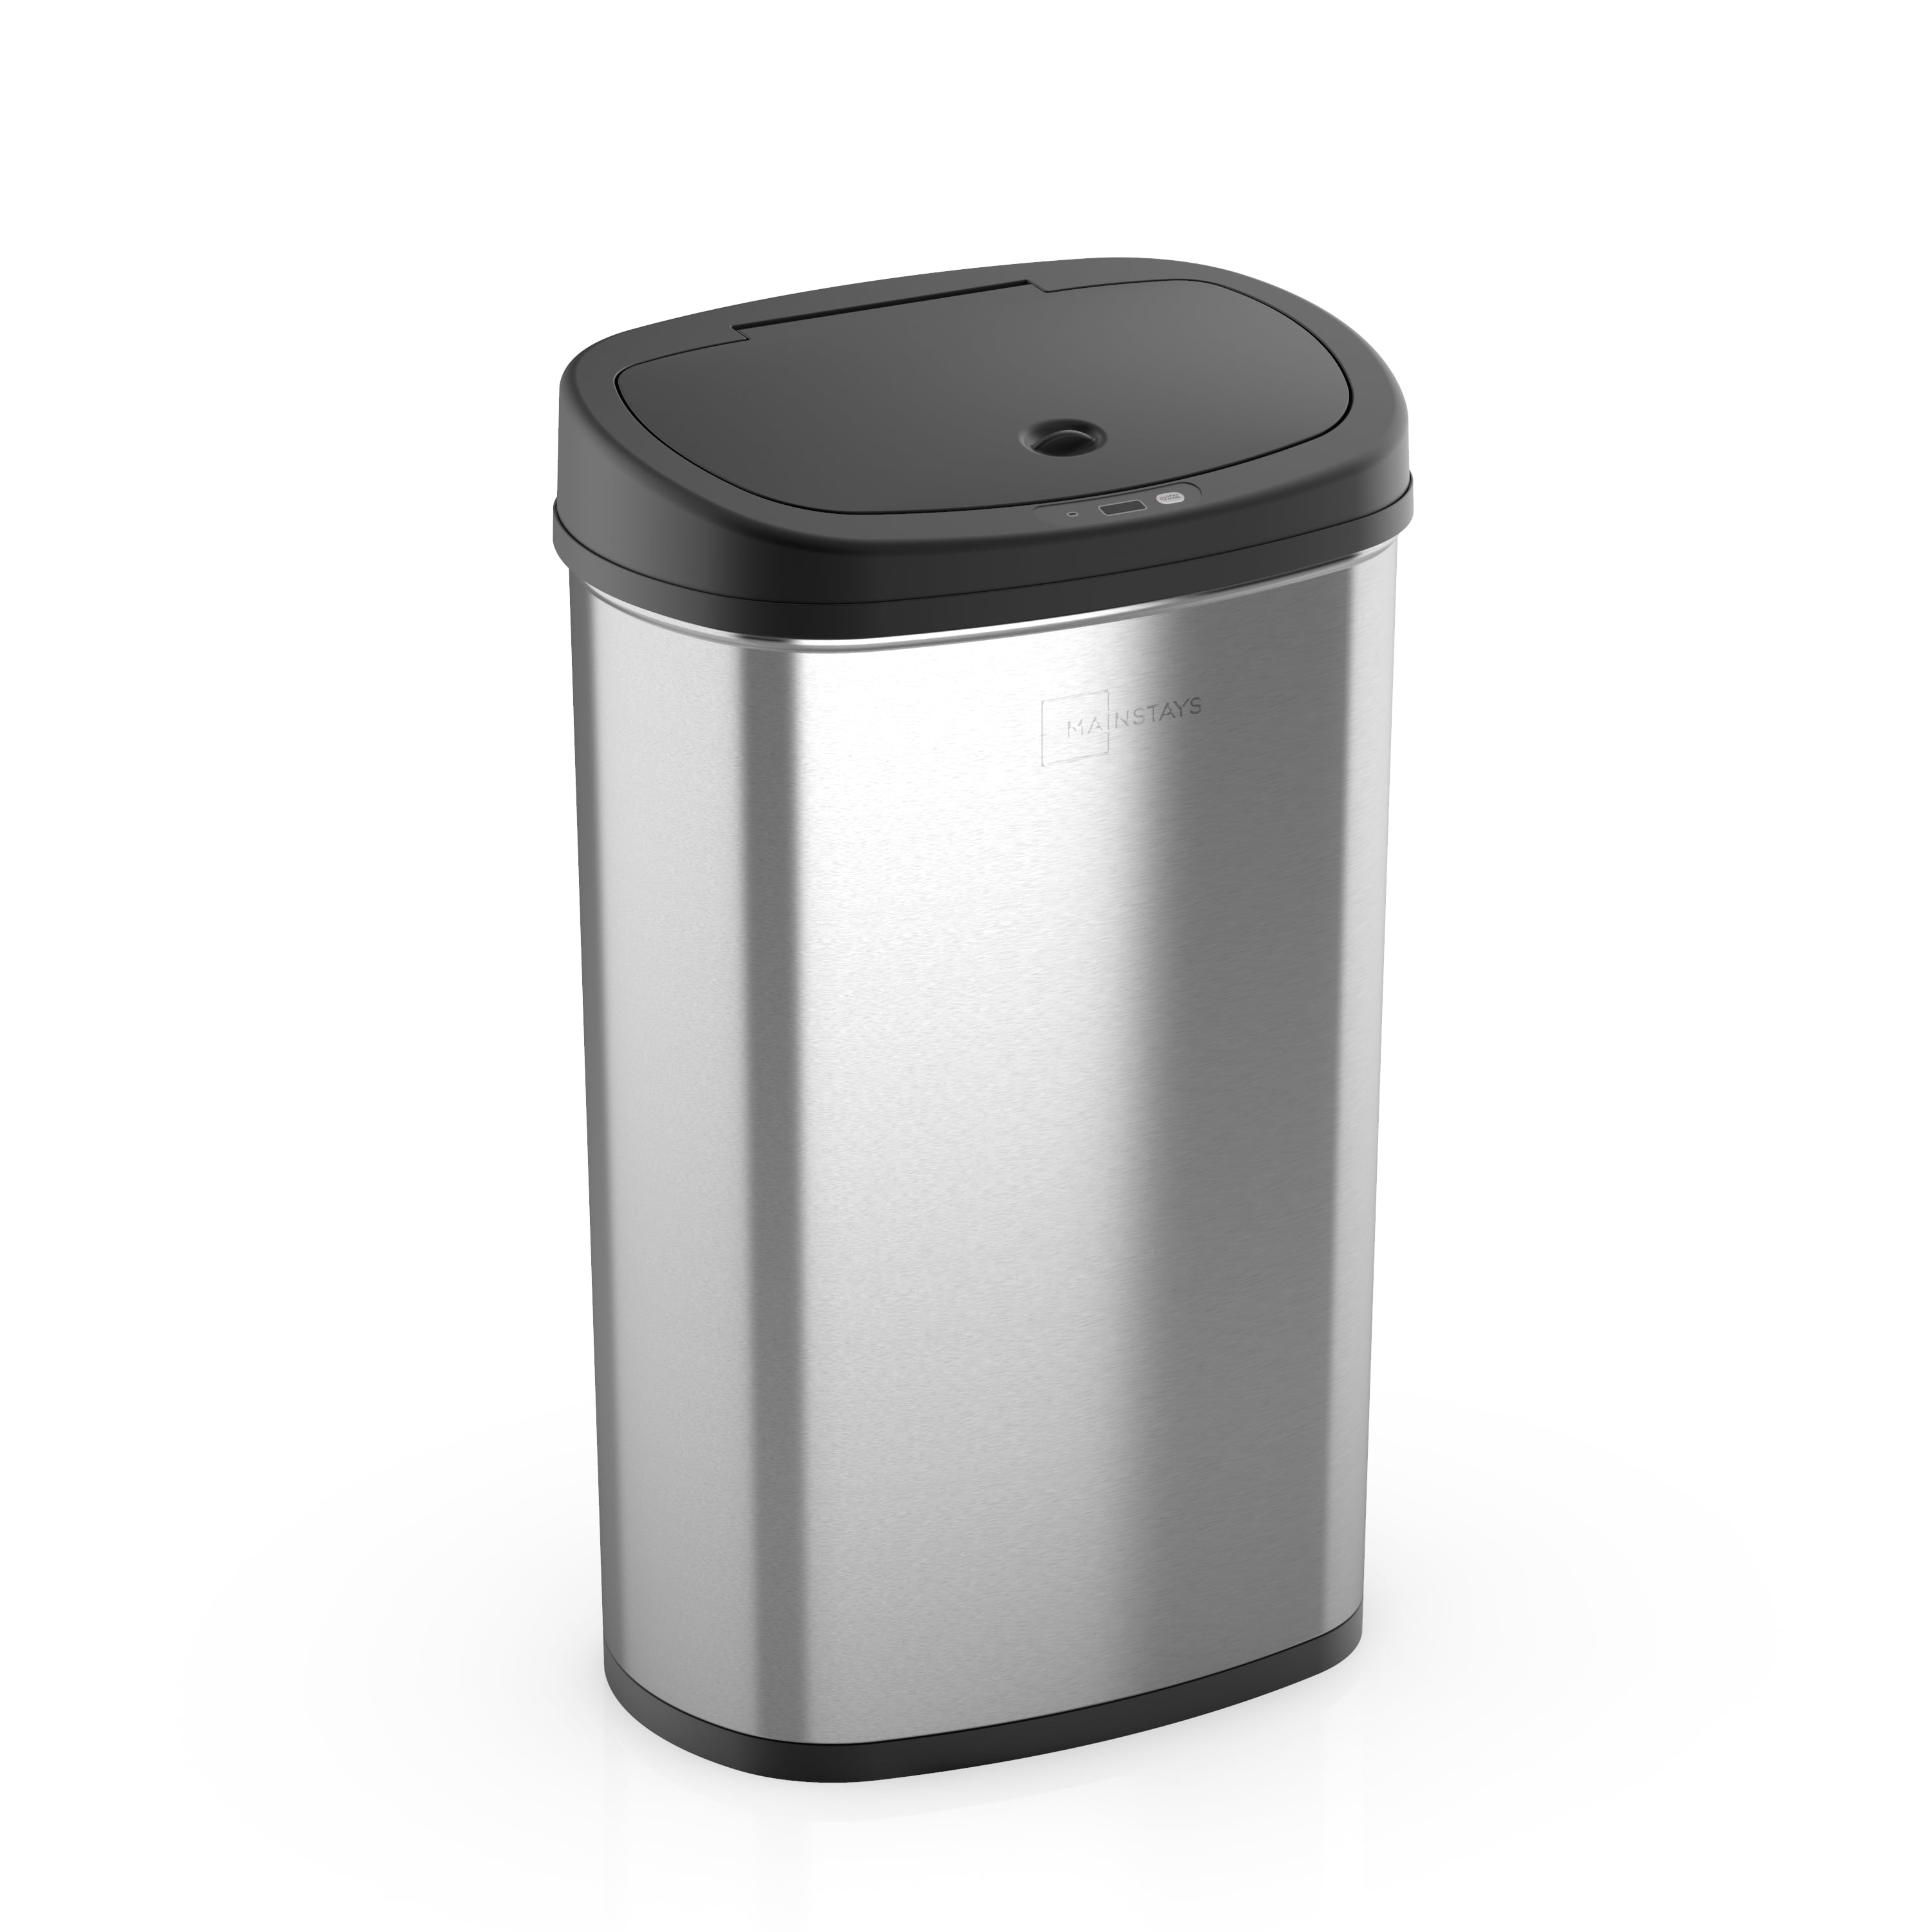 Mainstays, 13.2 Gal/50 L Motion Sensor Kitchen Garbage Can, Stainless 50 L Stainless Steel Trash Can